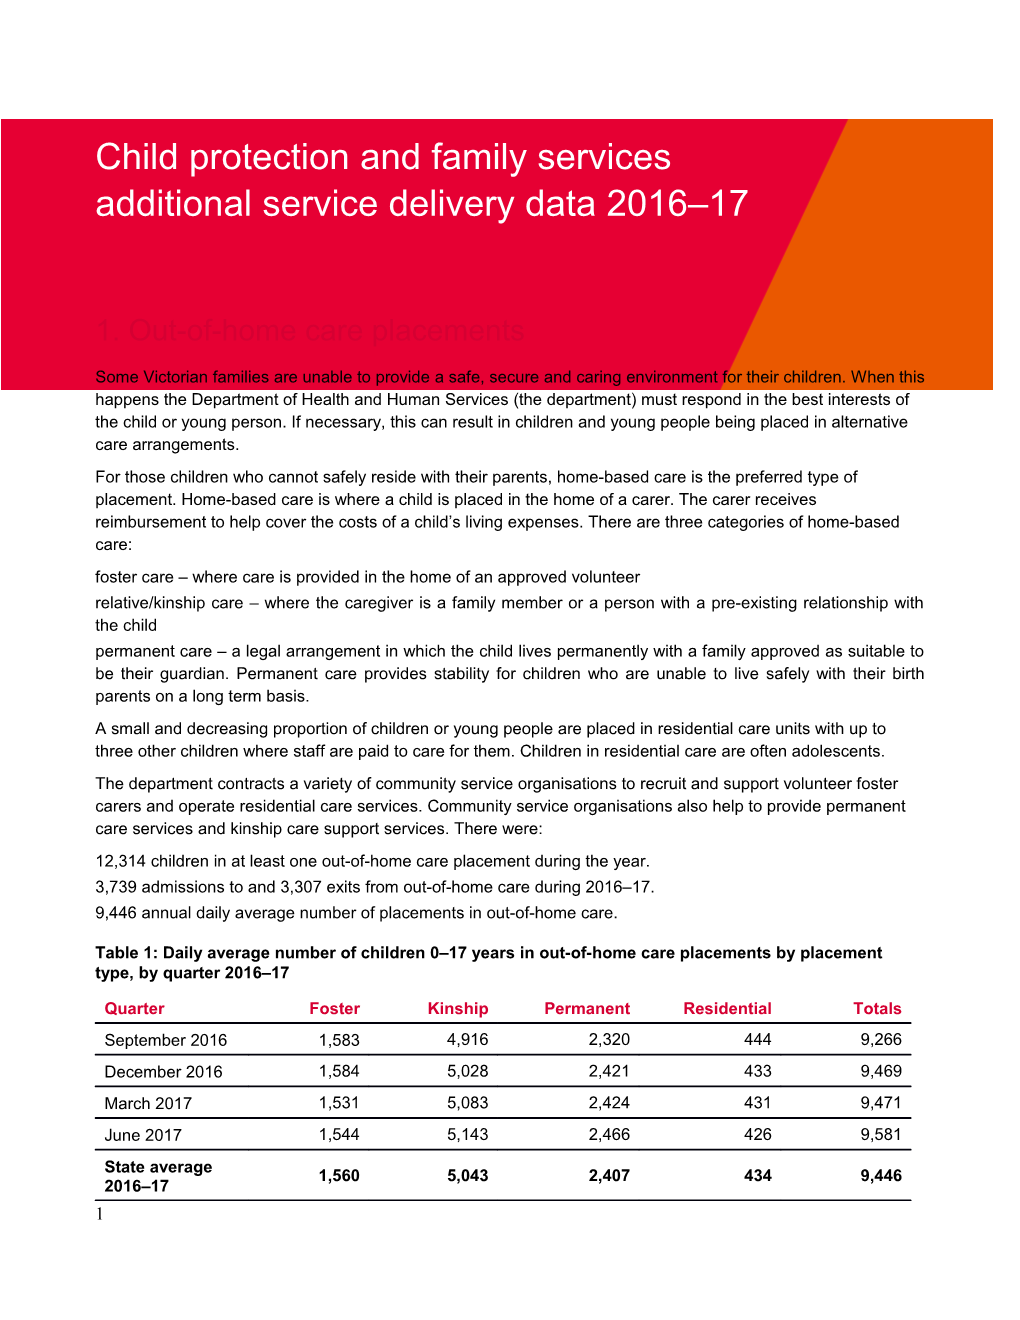 Child Protection and Family Services Additional Service Delivery Data 2016 17